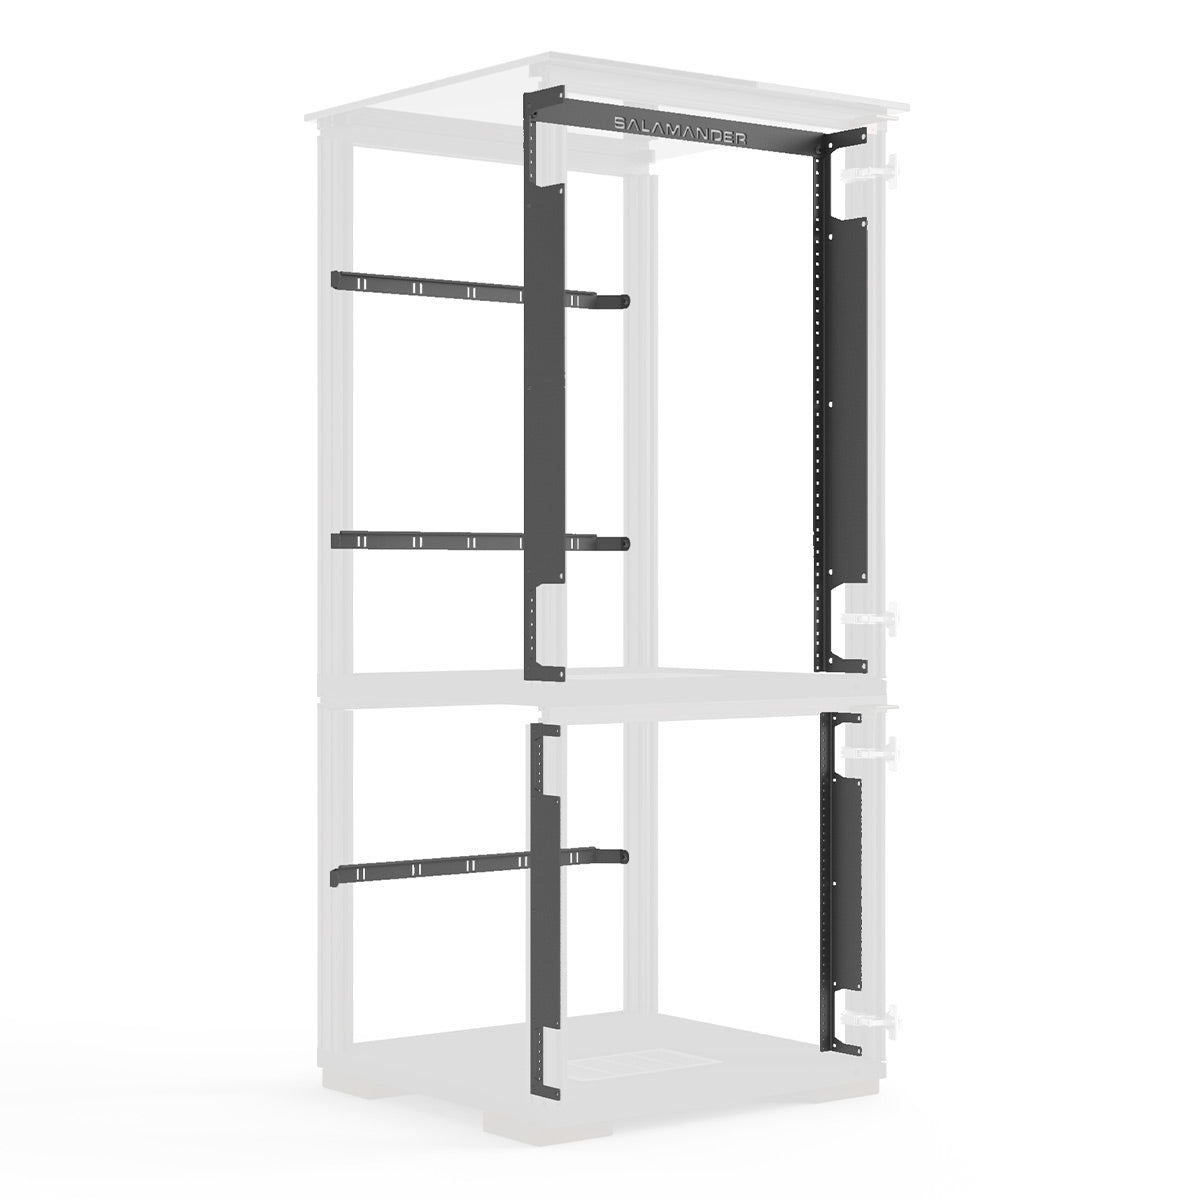 Salamander Chameleon Collection Miami 517 RM Single Pro Audio Rack (High Gloss White with Black Glass Top)